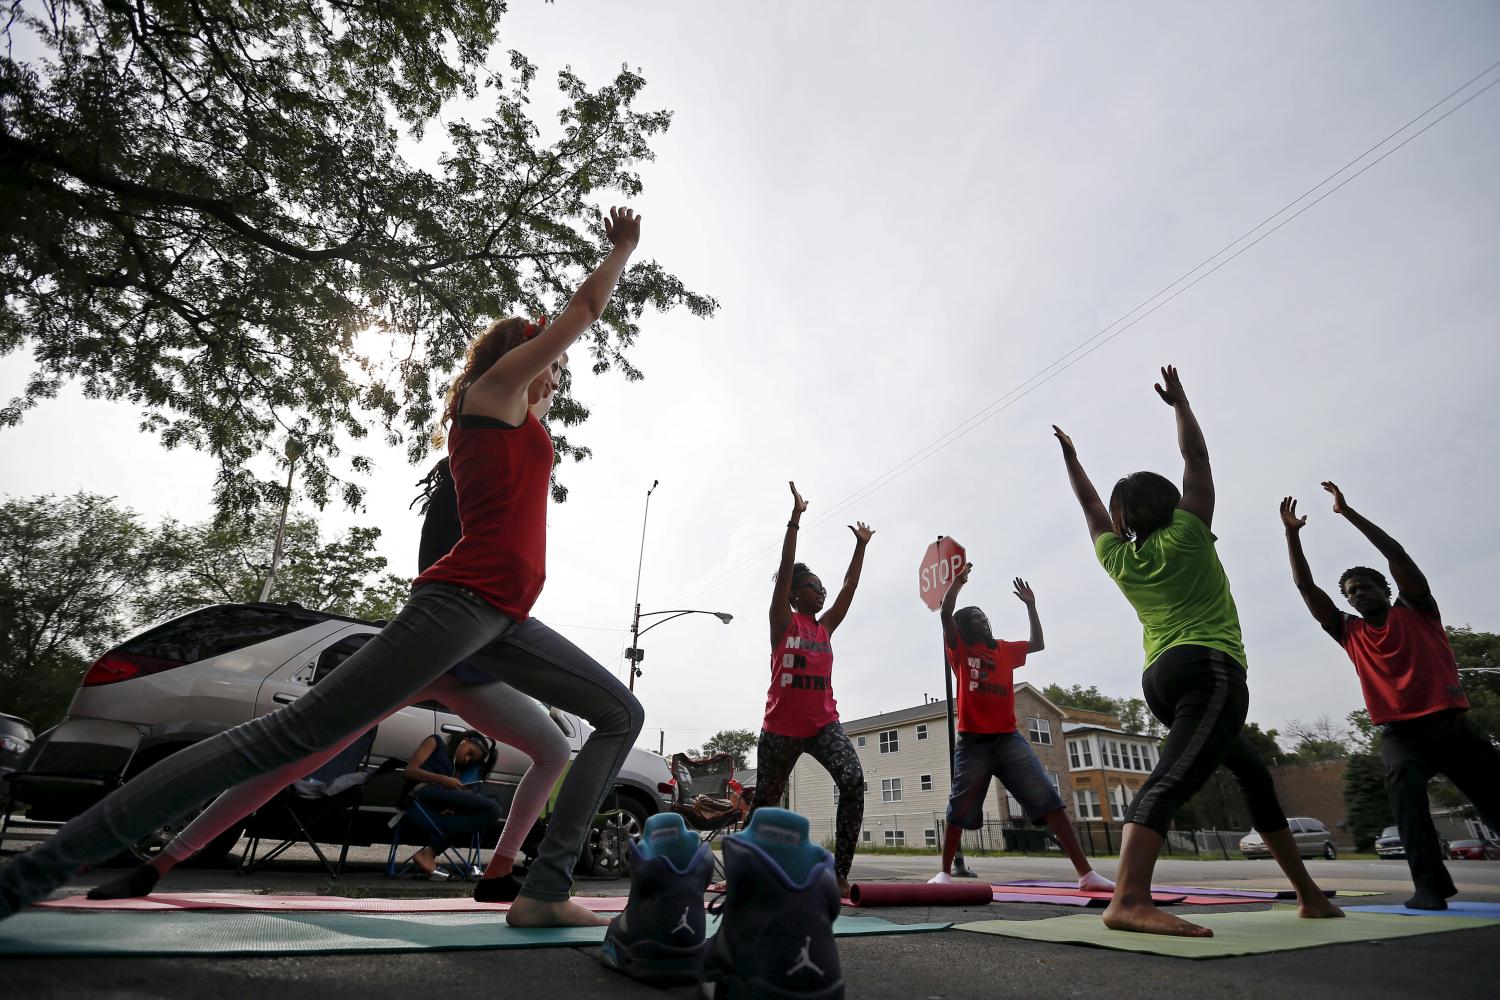 Mothers Against Senseless Killings founder Tamar Manasseh takes part in a yoga class on a street intersection in the Englewood neighborhood of Chicago